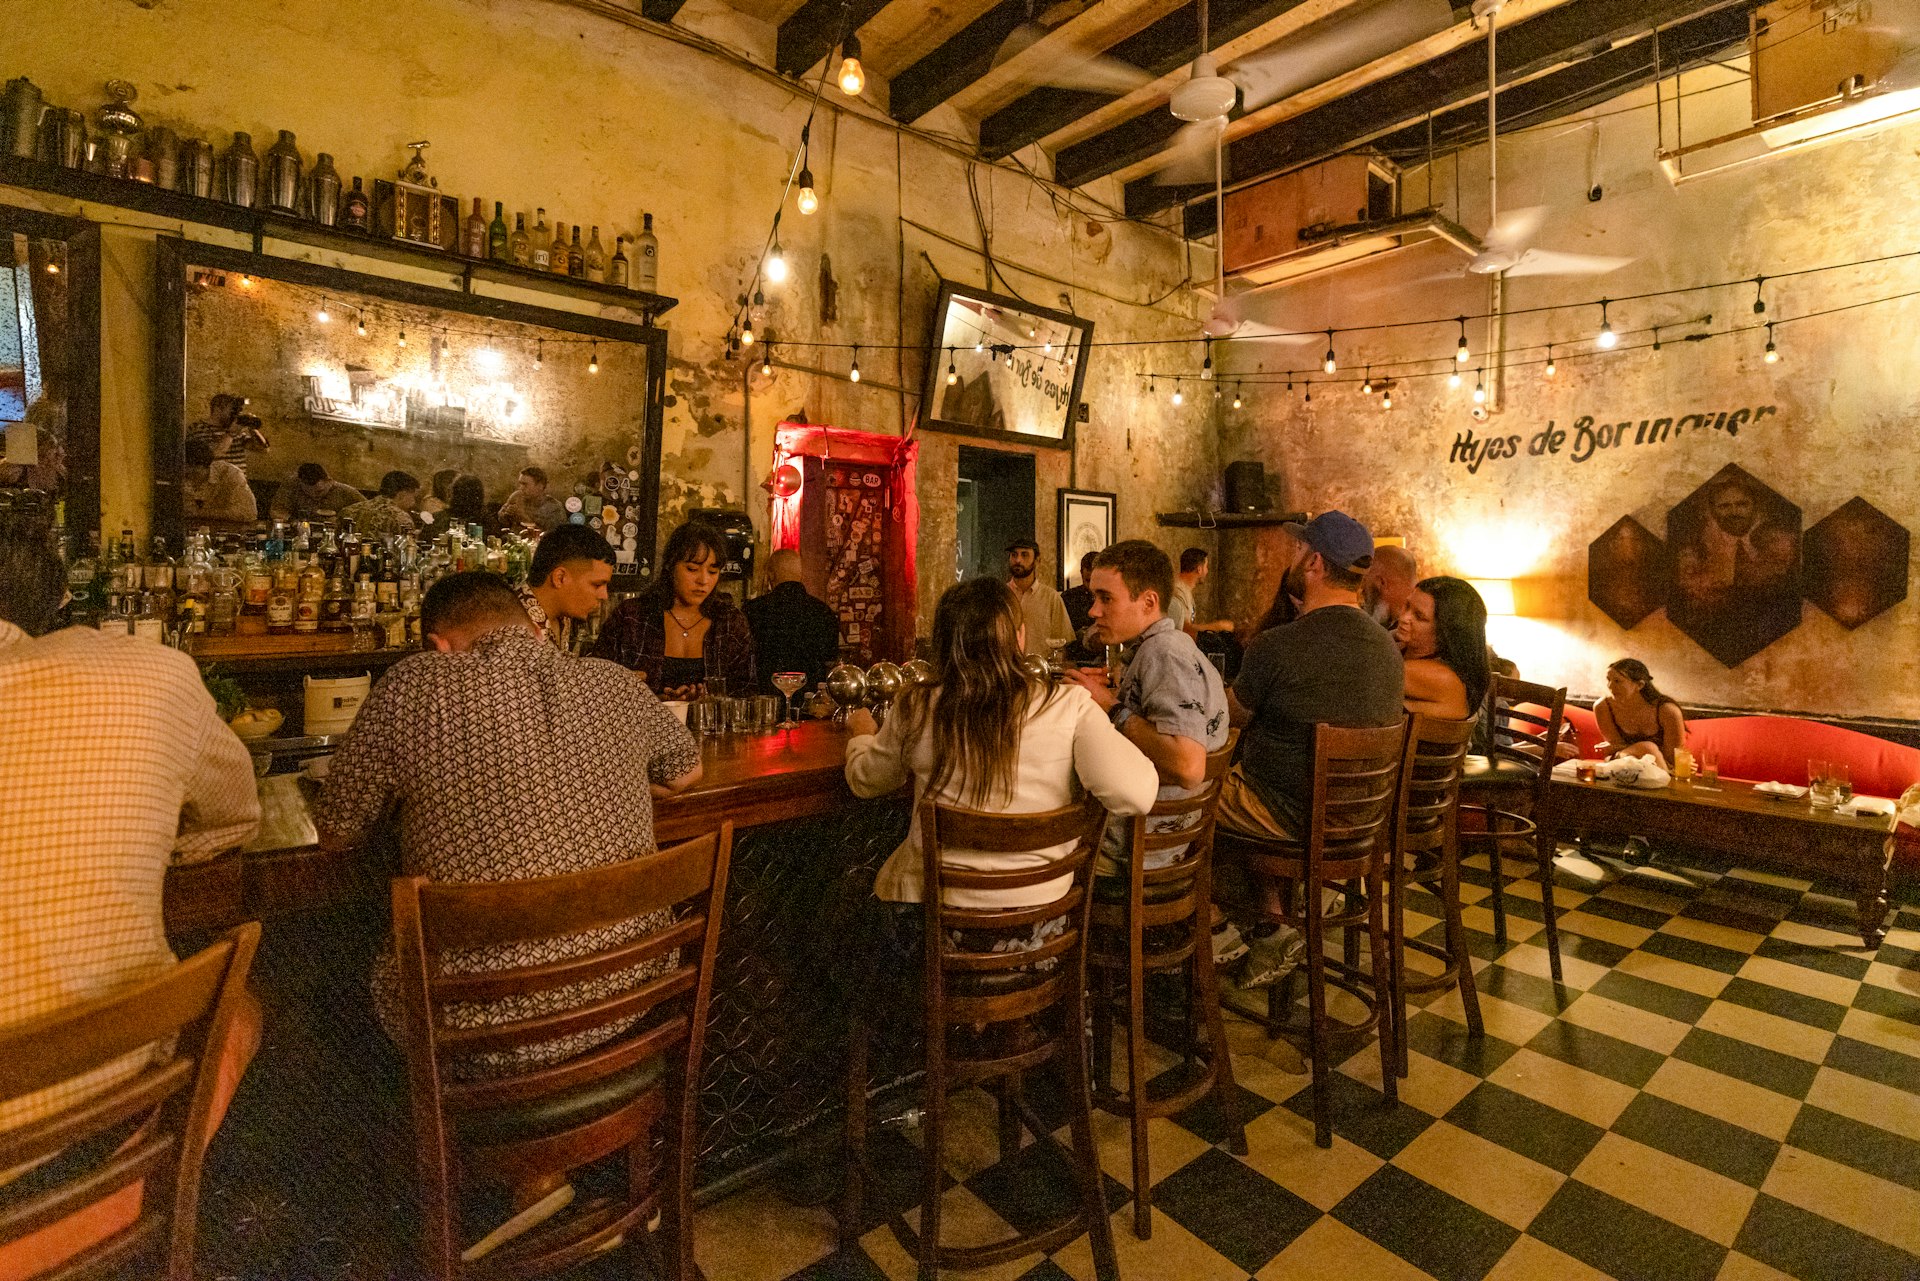 People sit and drink cocktails at La Factoria, Puerto Rico which has a green and white tiled floor and a bar